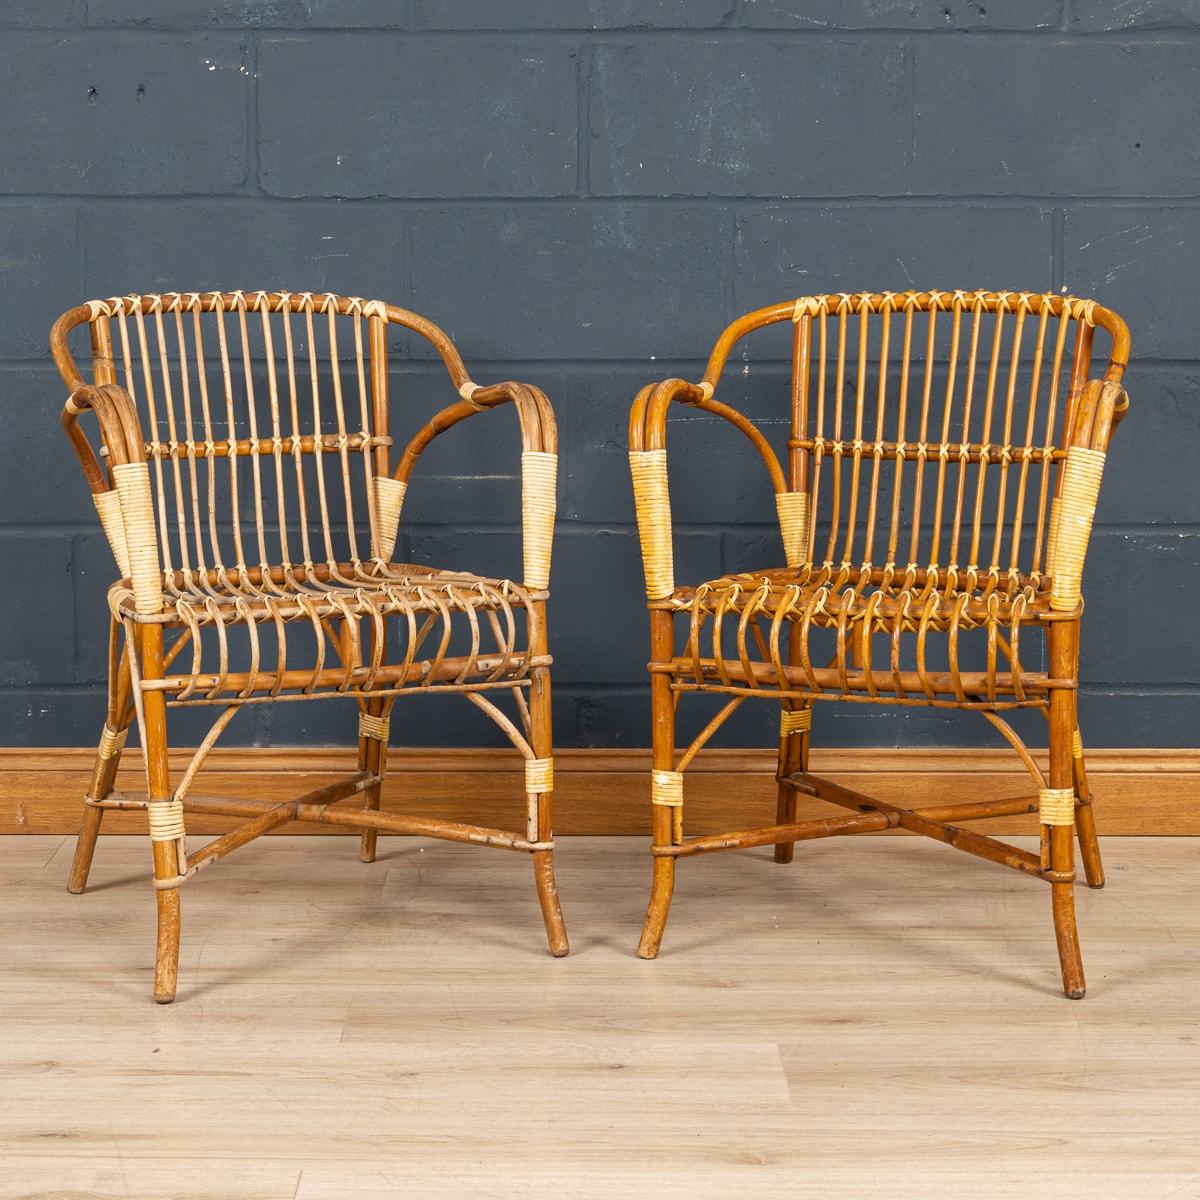 A charming pair of mid century wicker chairs made in France in the 1960s by Maison Drucker. Sometimes referred to as “bistrot chairs” as the model is so commonly seen in French bistrots up and down the country, what sets these apart from their